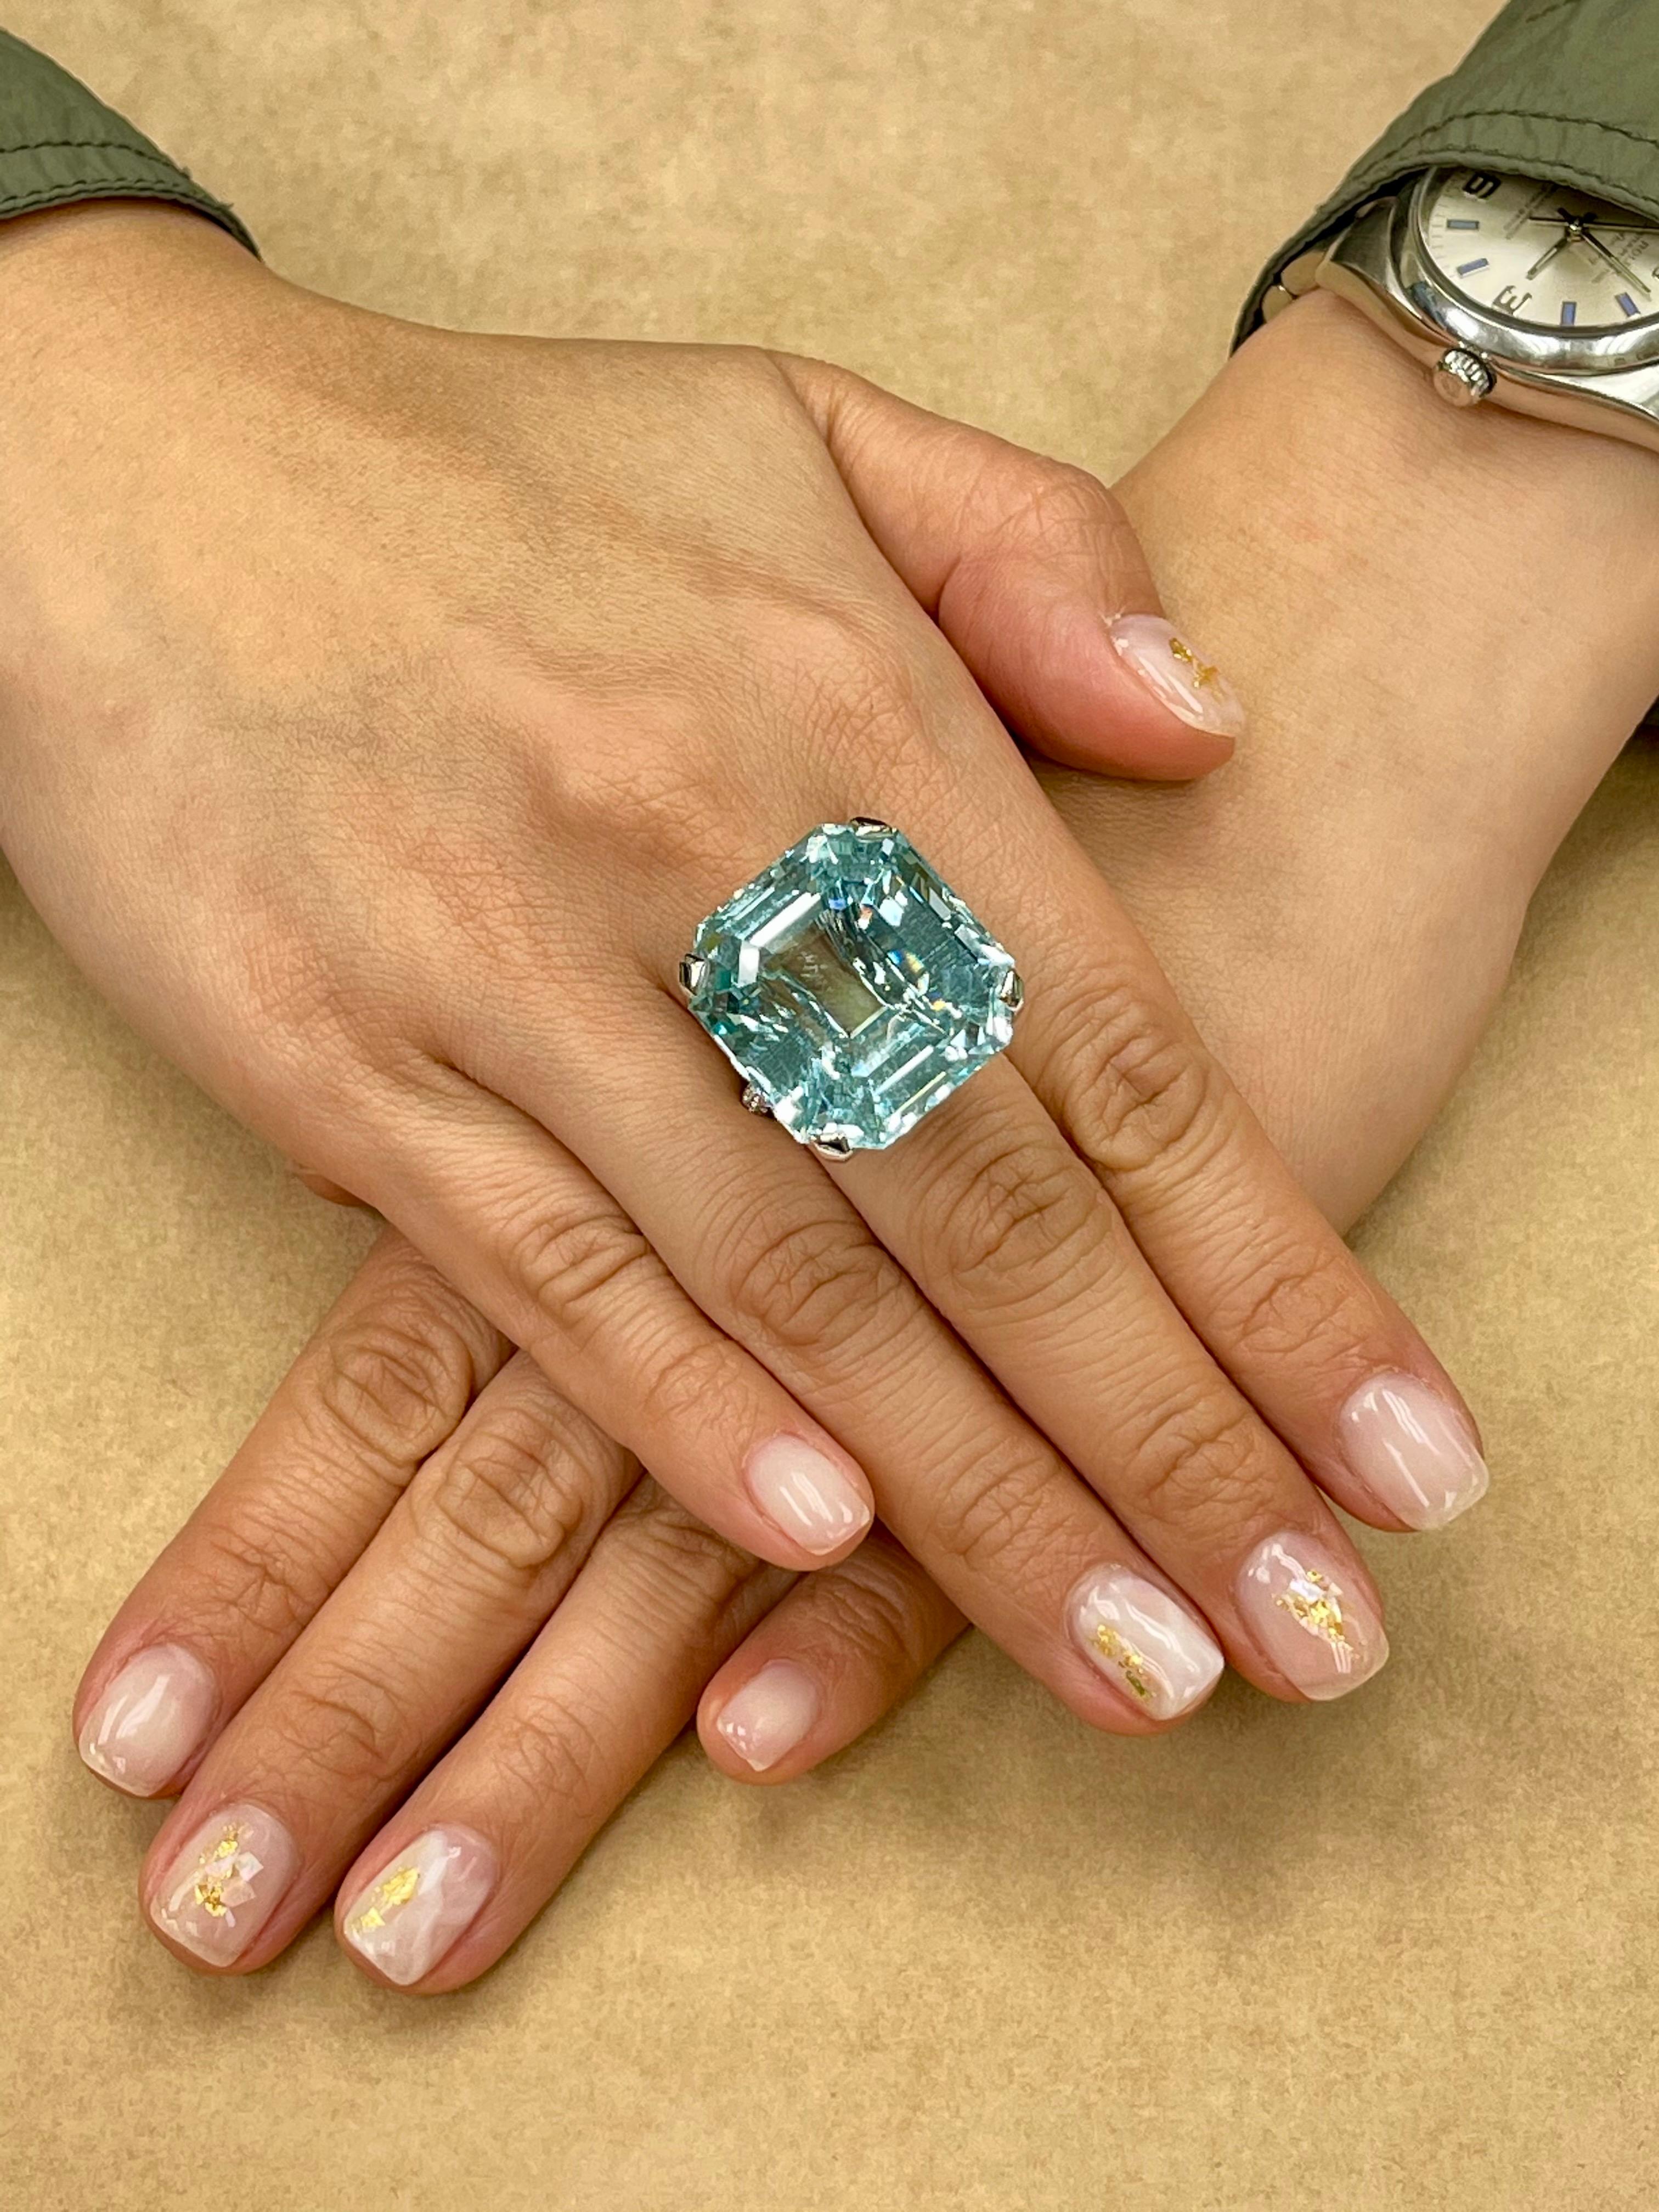 Check out the HD video! The video shows the most accurate color. This is a big statement piece! Here is a super nice Asscher cut Aquamarine and diamond ring. The center Aquamarine is a stunning 55.738 Cts. Not only is the size impressive, the